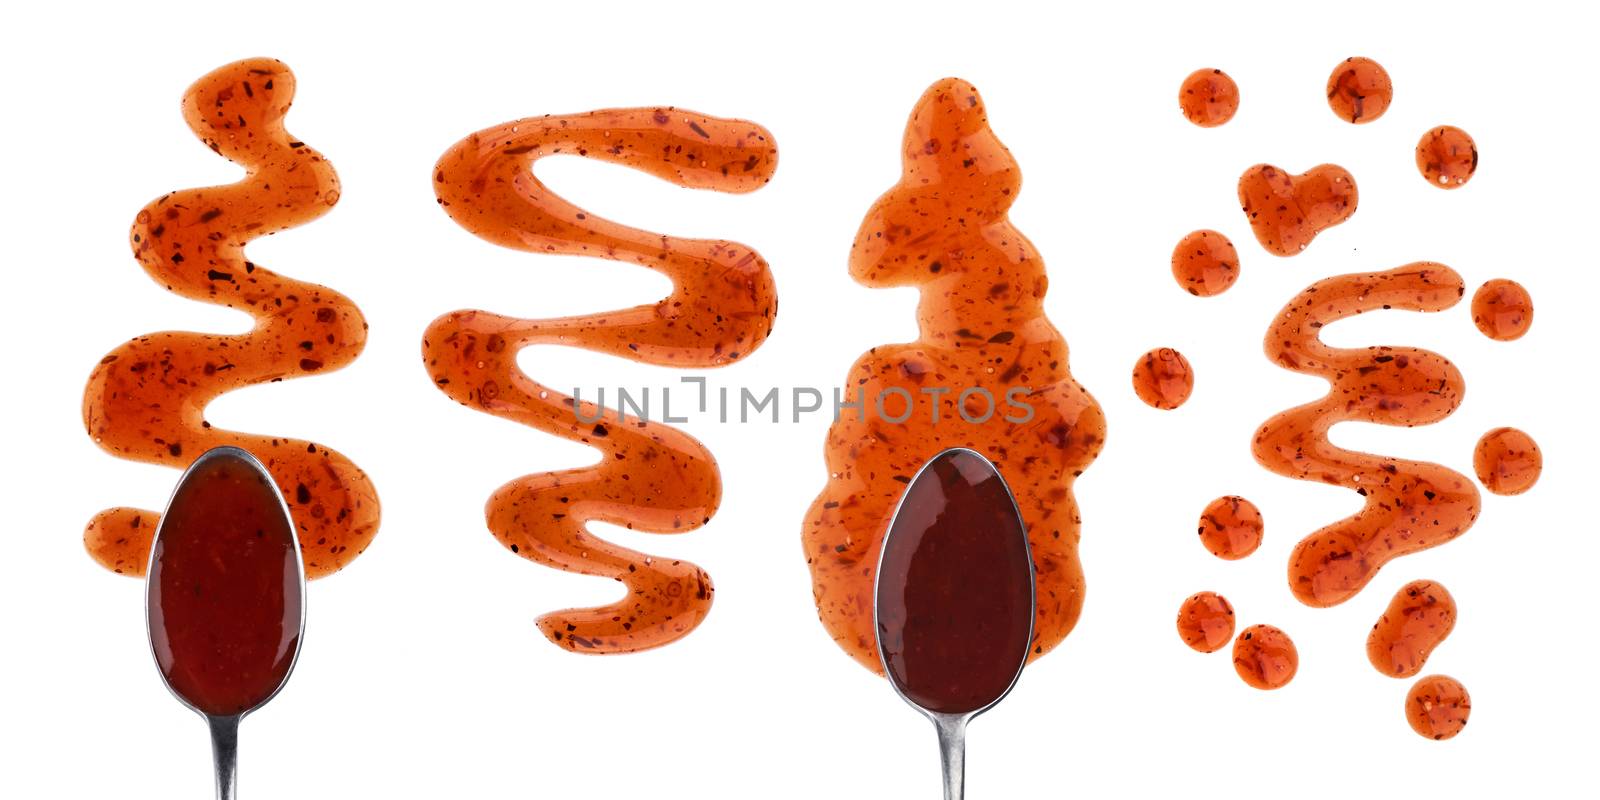 Cranberry sauce with spoon isolated on white background with clipping path. Top view